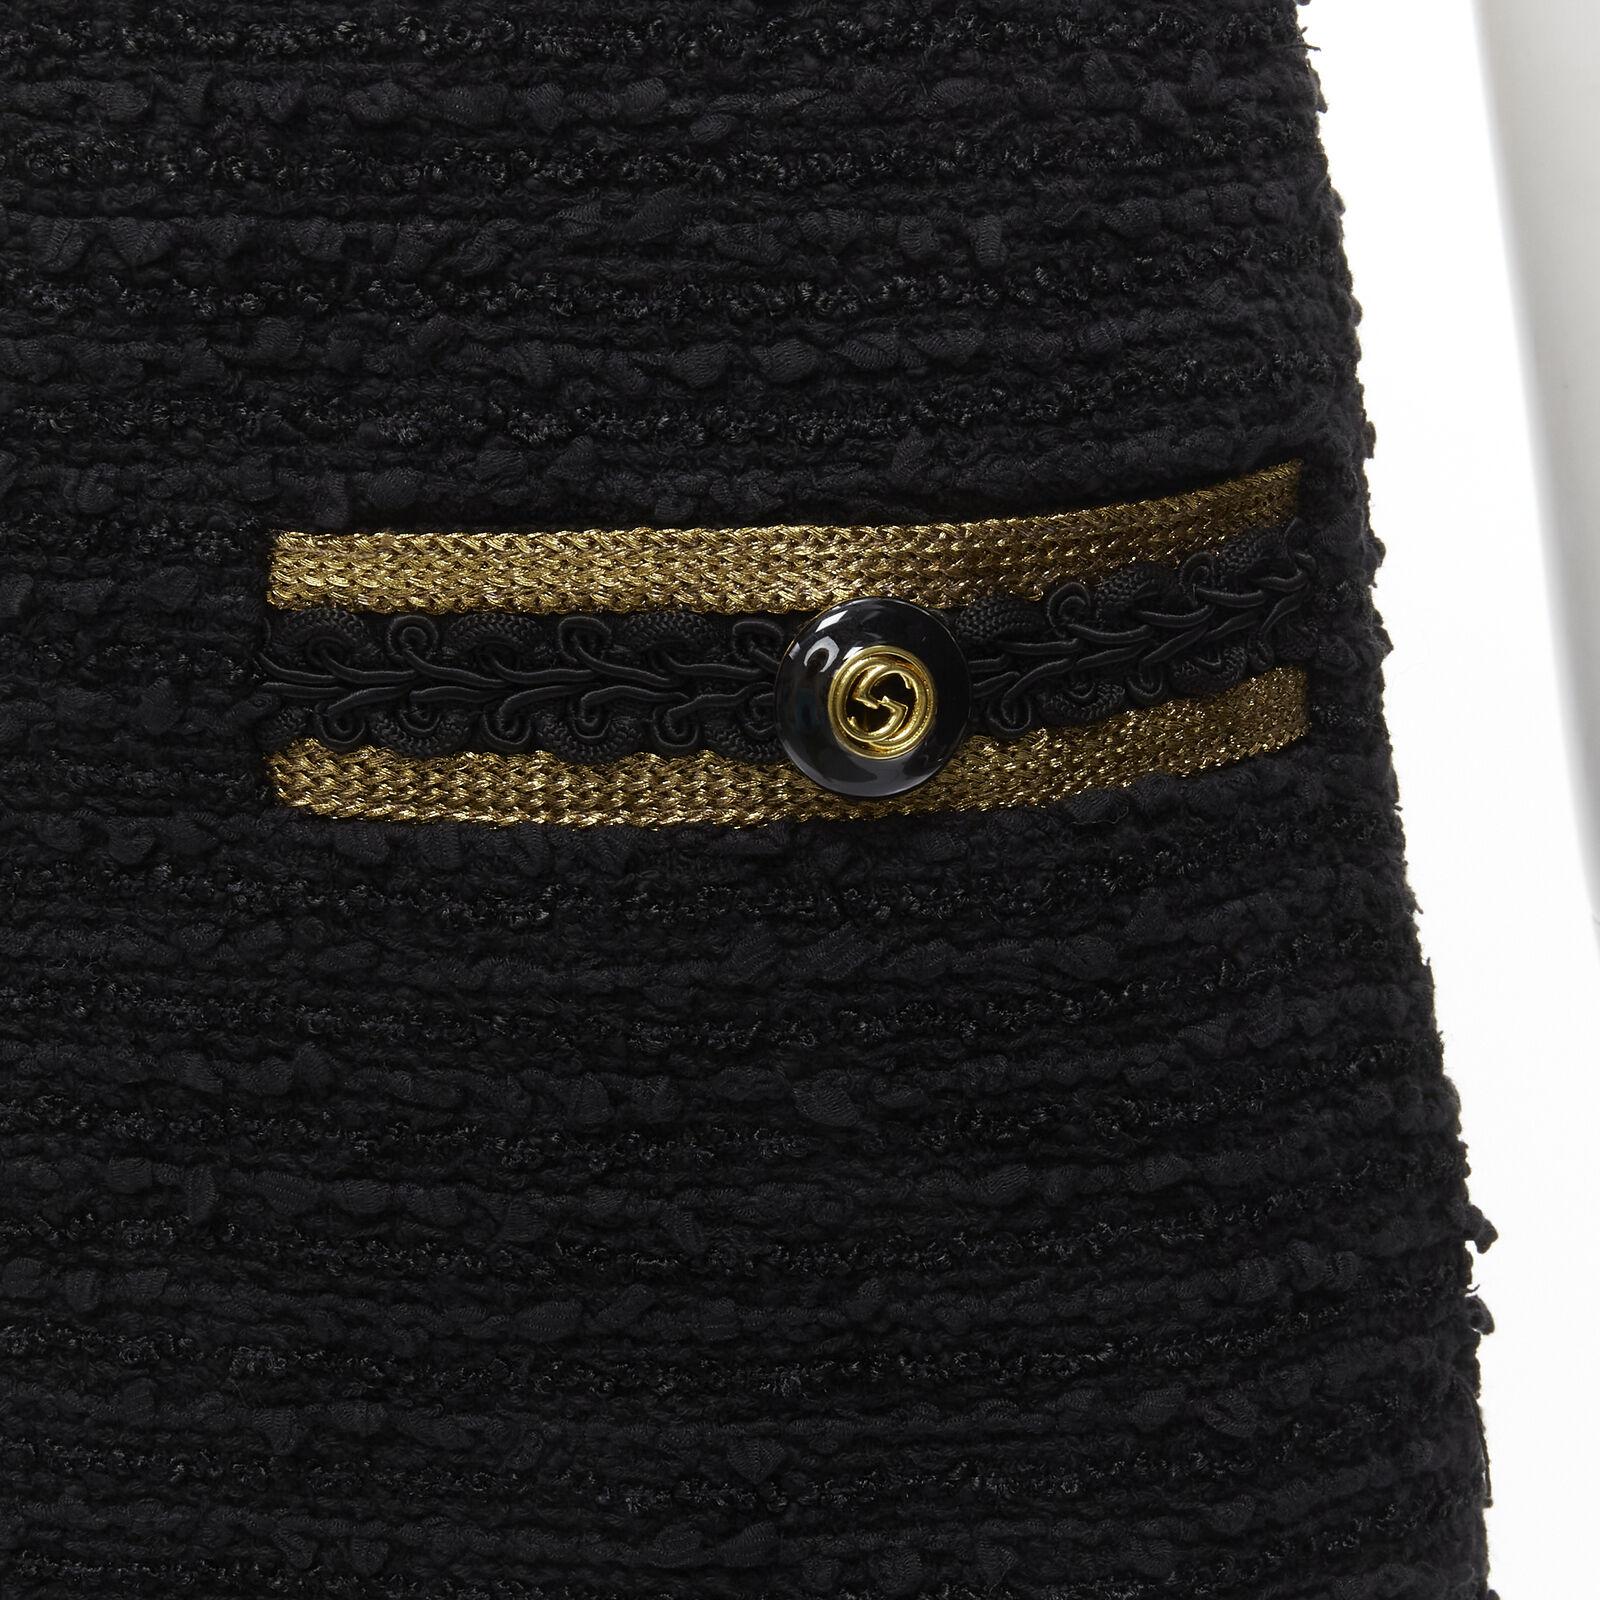 GUCCI GG logo button gold trim black tweed mini A-line skirt IT38 XS
Reference: AAWC/A00374
Brand: Gucci
Designer: Alessandro Michele
Material: Cotton, Blend
Color: Black, Gold
Pattern: Solid
Closure: Zip
Lining: Silk
Extra Details: GG logo